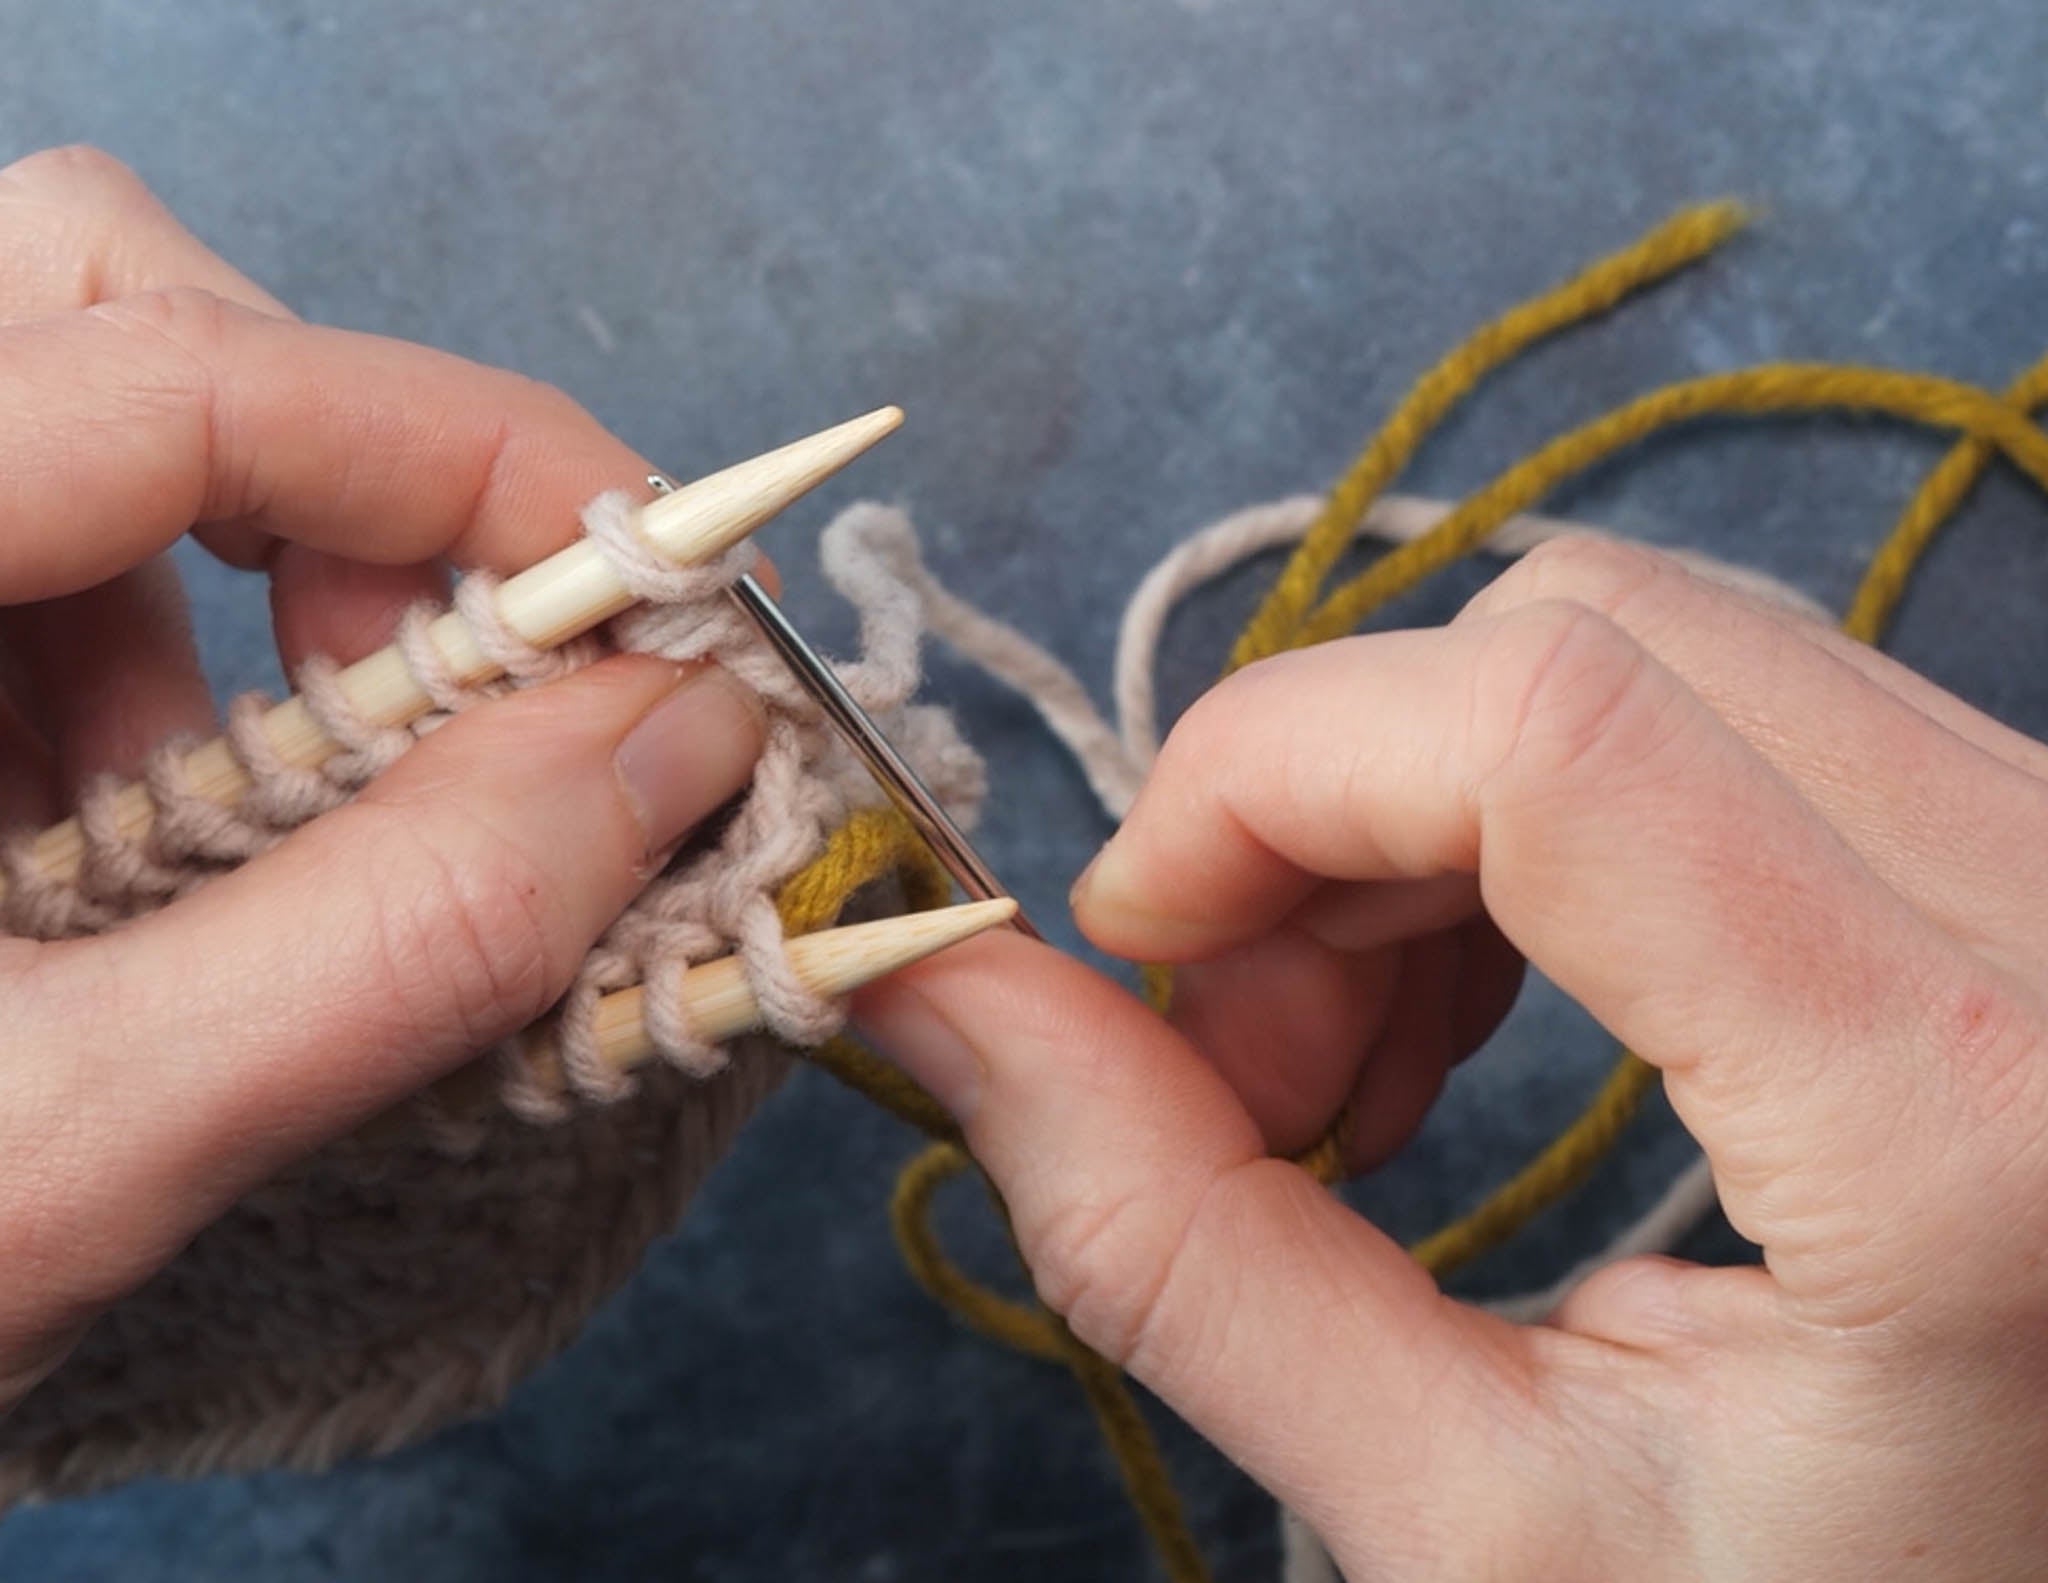 Insert tapestry needle into the first st on the back needle knit wise.